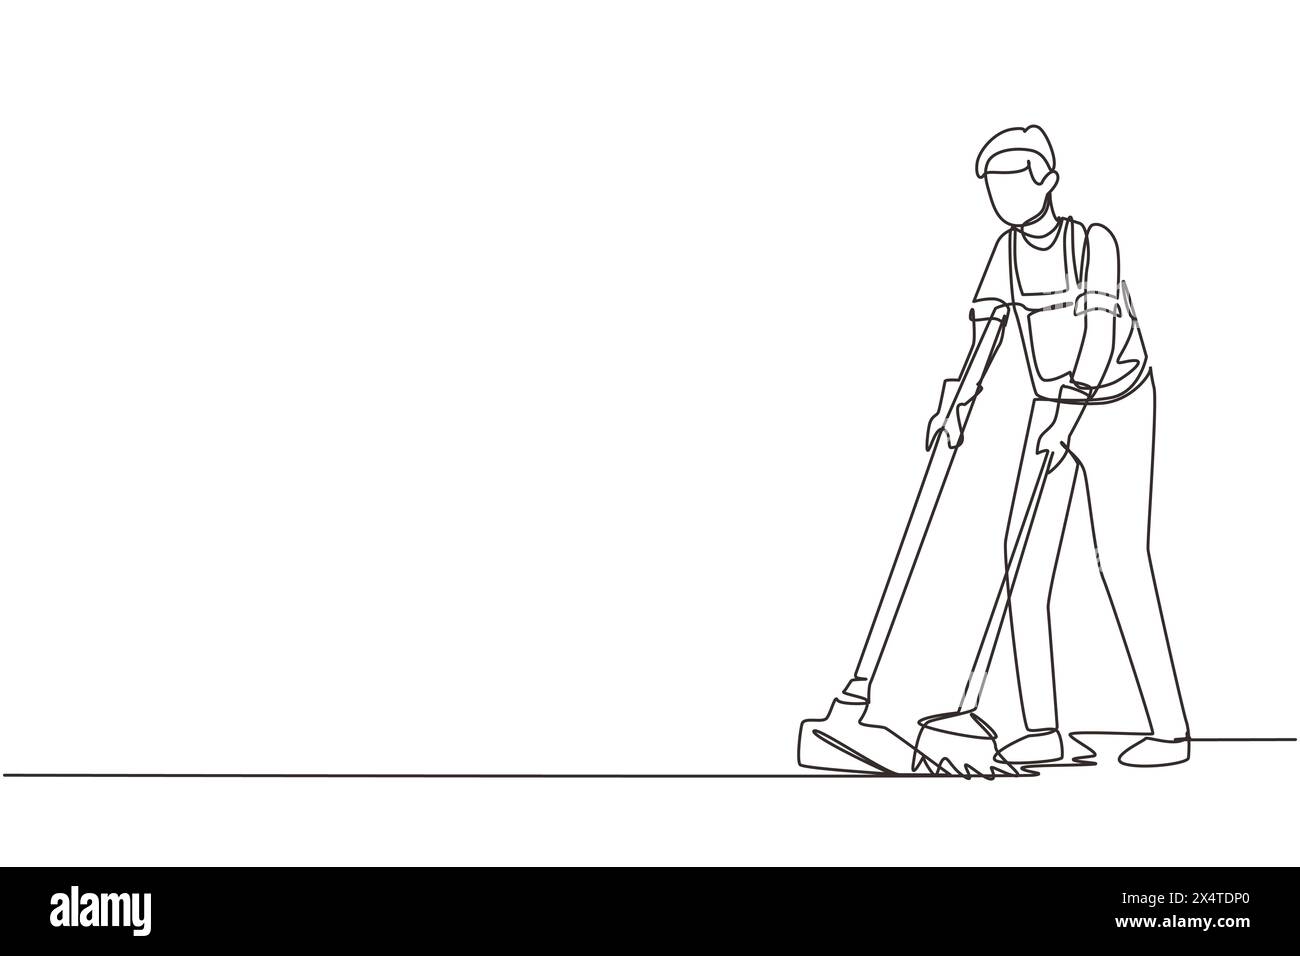 Single continuous line drawing housekeeping male worker with broom and dustpan. Young man janitor, sweeping the floor with broom, holding dustpan, pro Stock Vector